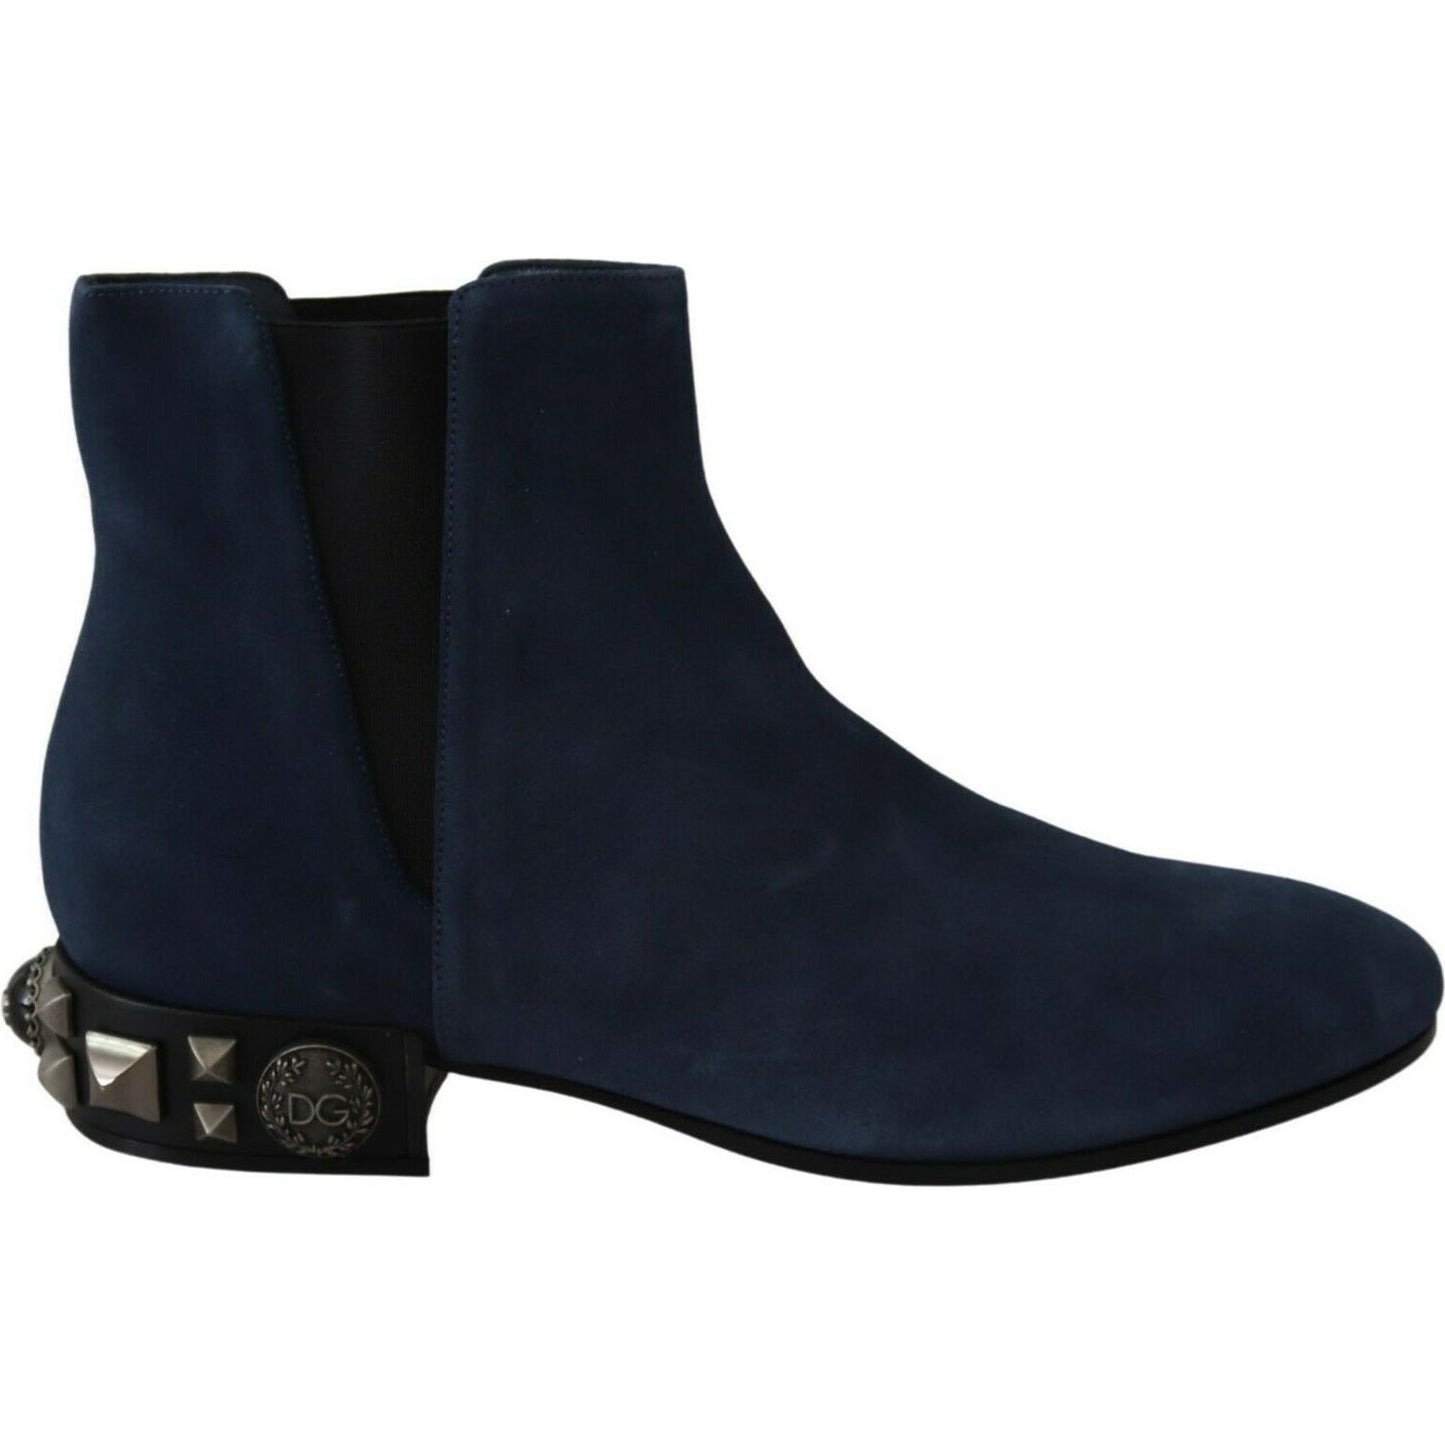 Dolce & Gabbana Chic Blue Suede Mid-Calf Boots with Stud Details blue-suede-embellished-studded-boots-shoes WOMAN BOOTS s-l1600-2022-06-30T120555.056-9359e154-99b.jpg